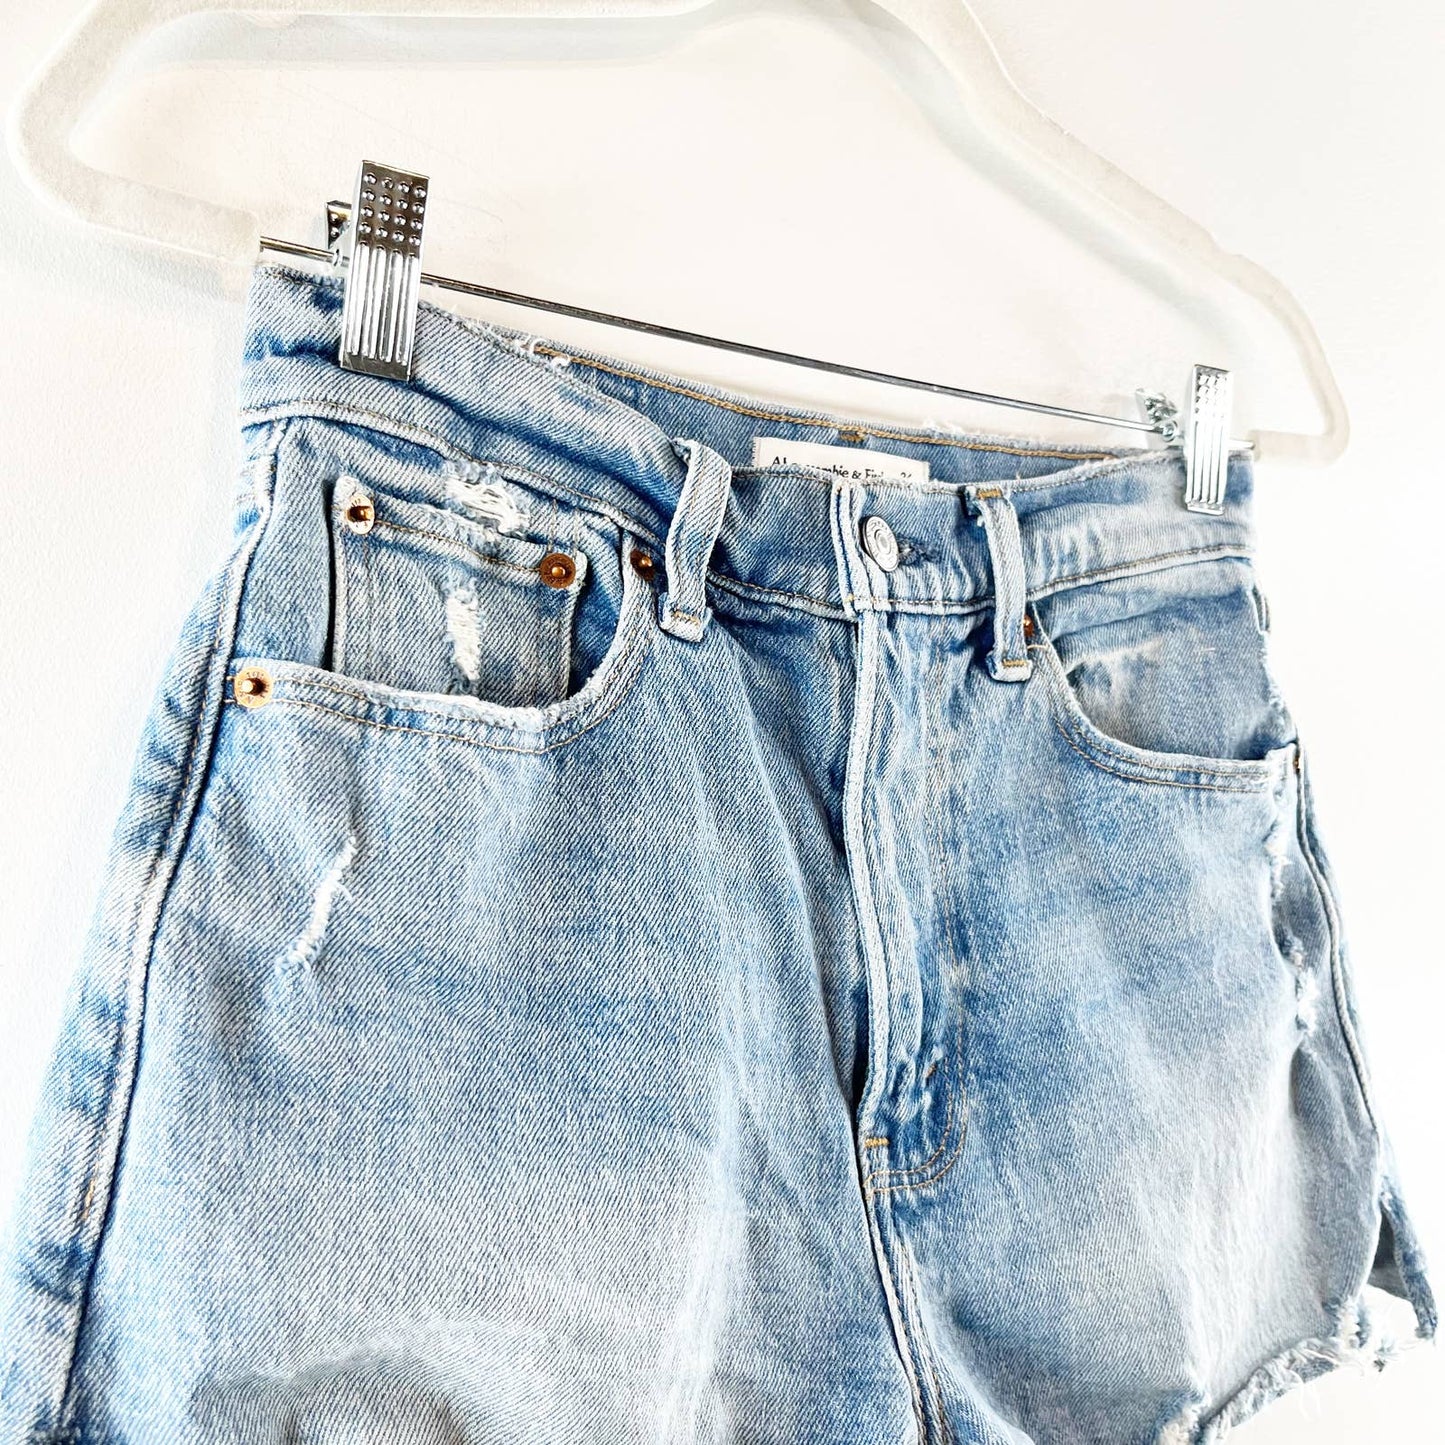 Abercrombie & Fitch The Mom Shorts High Rise Denim Jean Shorts Blue 24 / 00